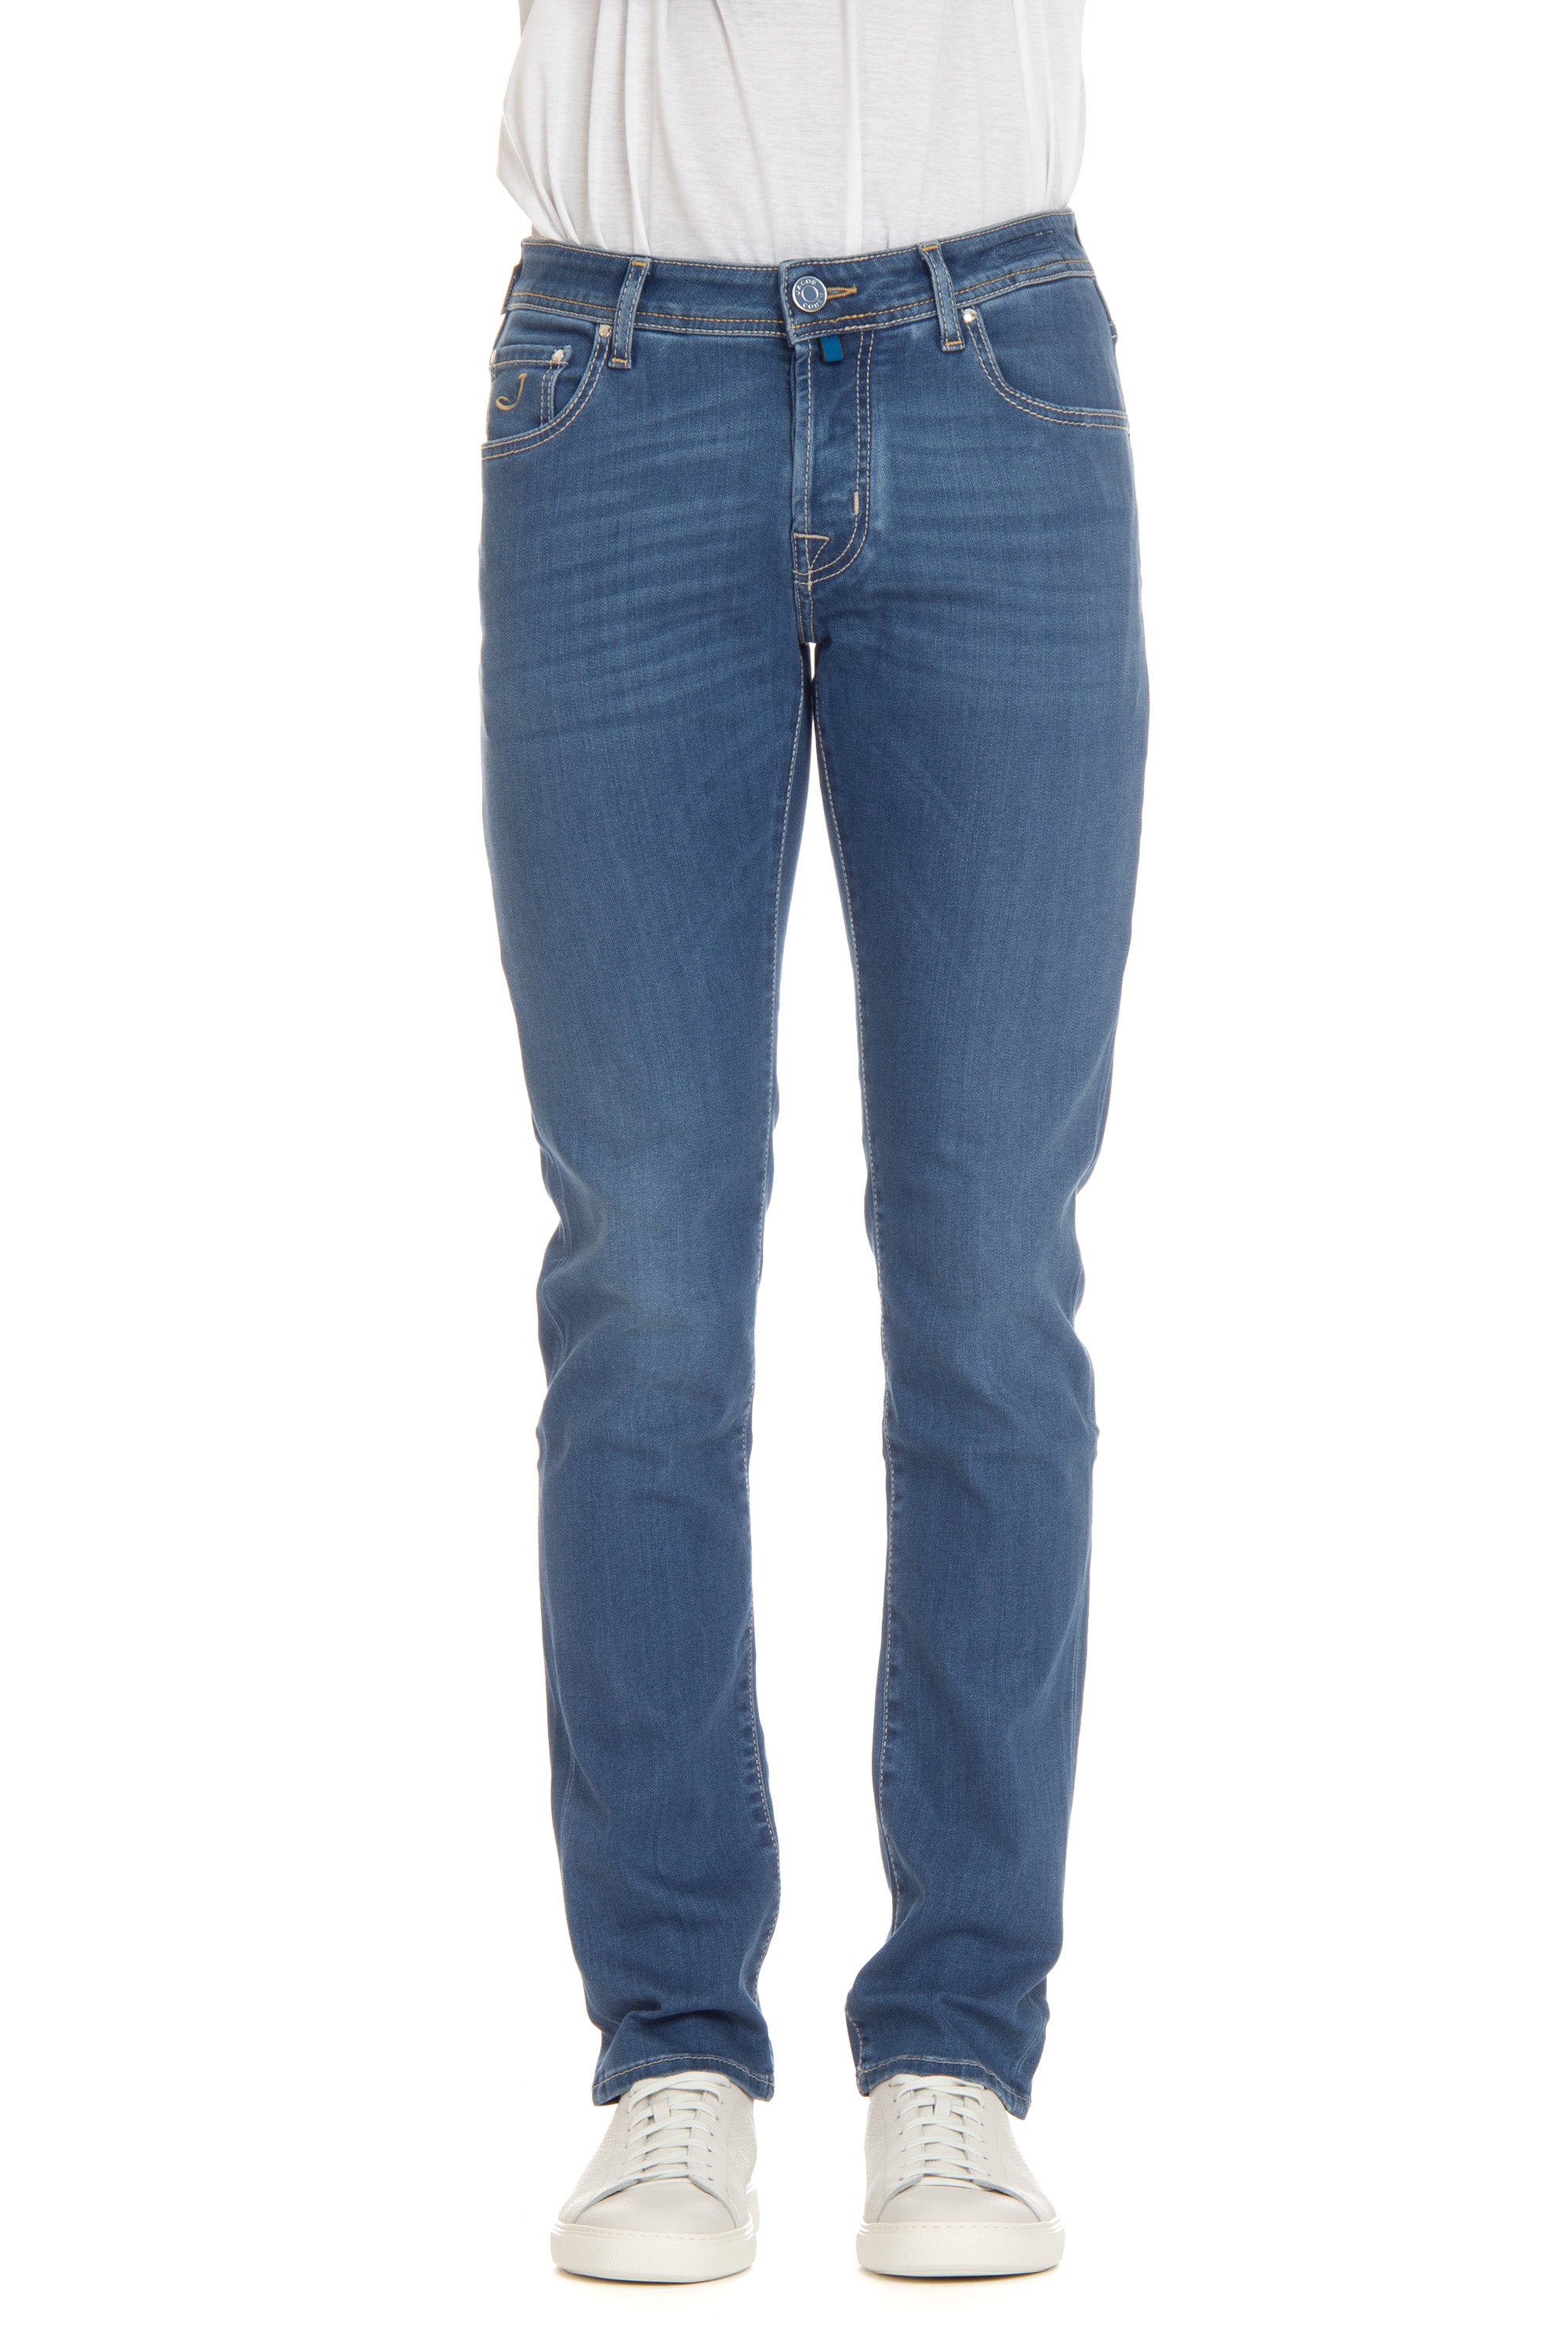 Jeans in cotton-viscose light blue label in Nick Slim fit pony hair